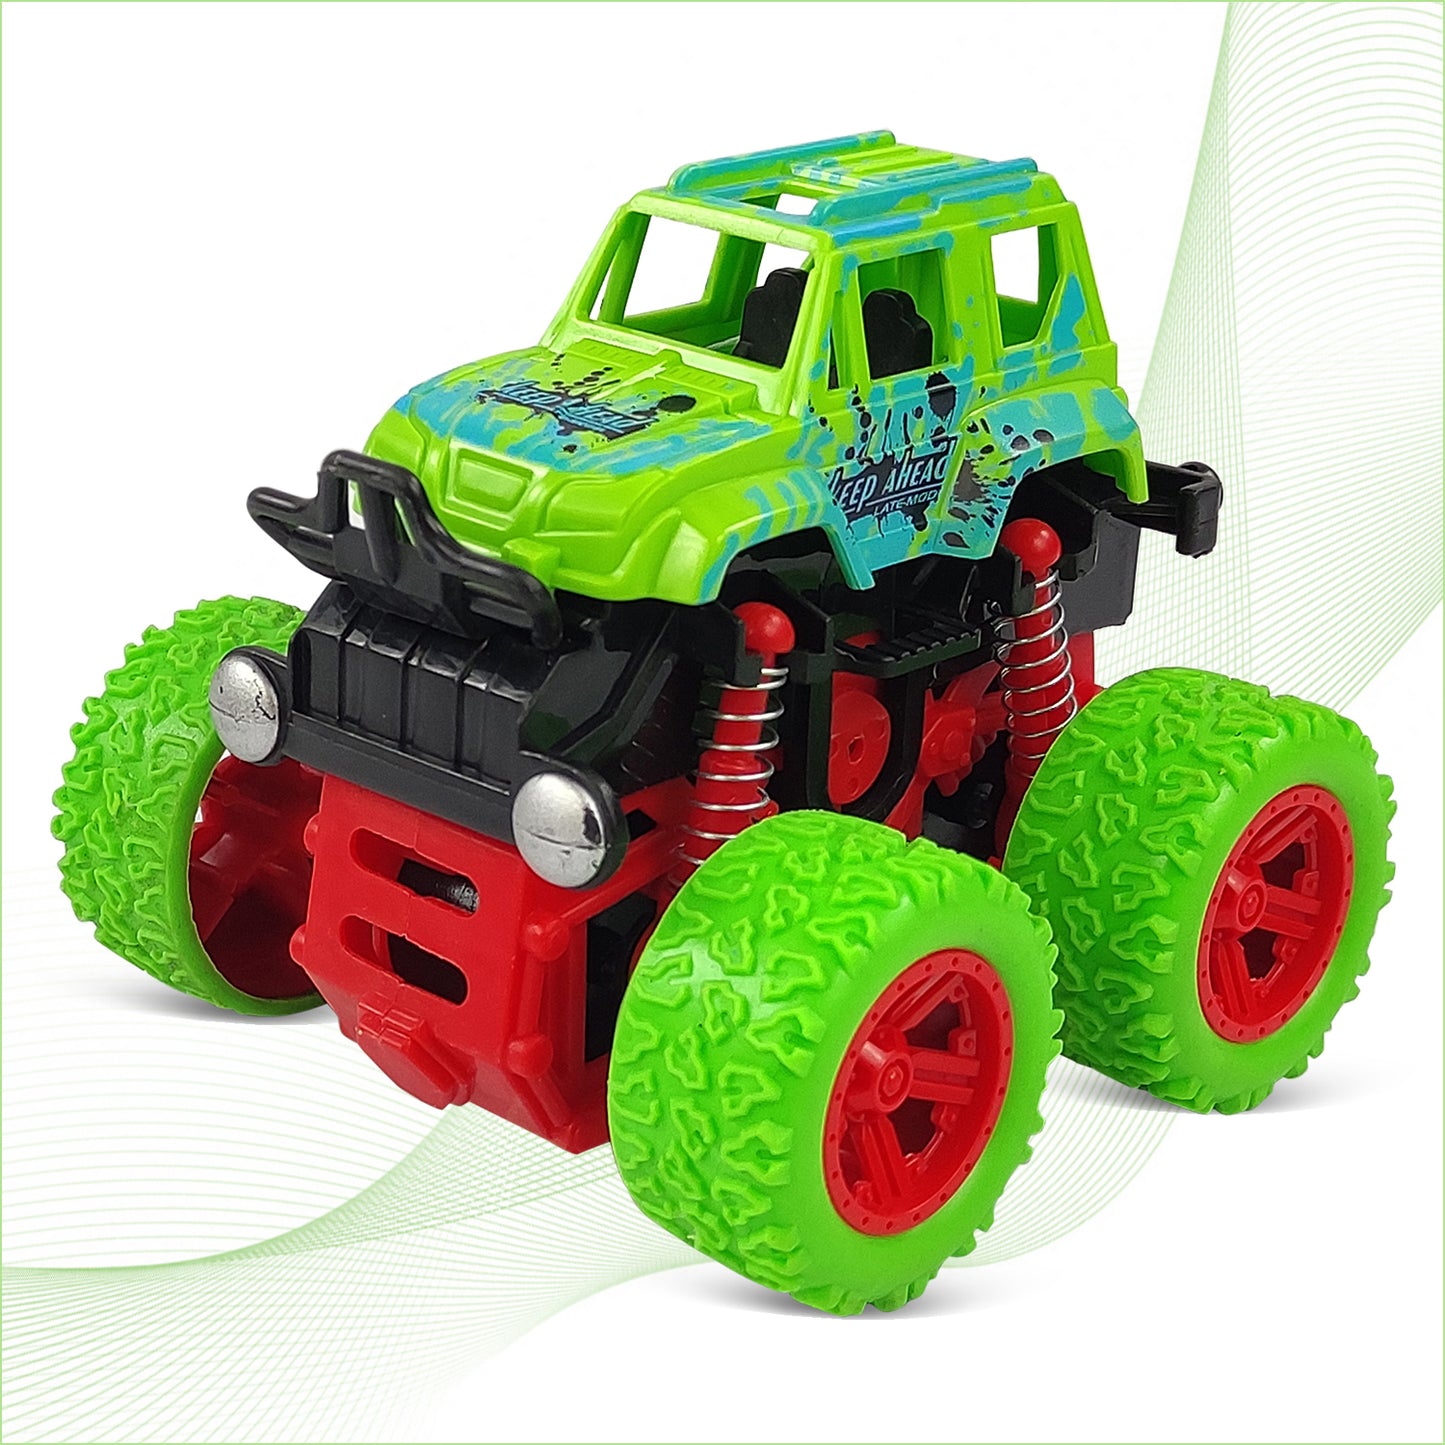 NHR Rock Crawler 4 Wheel Remote Control Racing Car: Any Color, Age 4+ Years